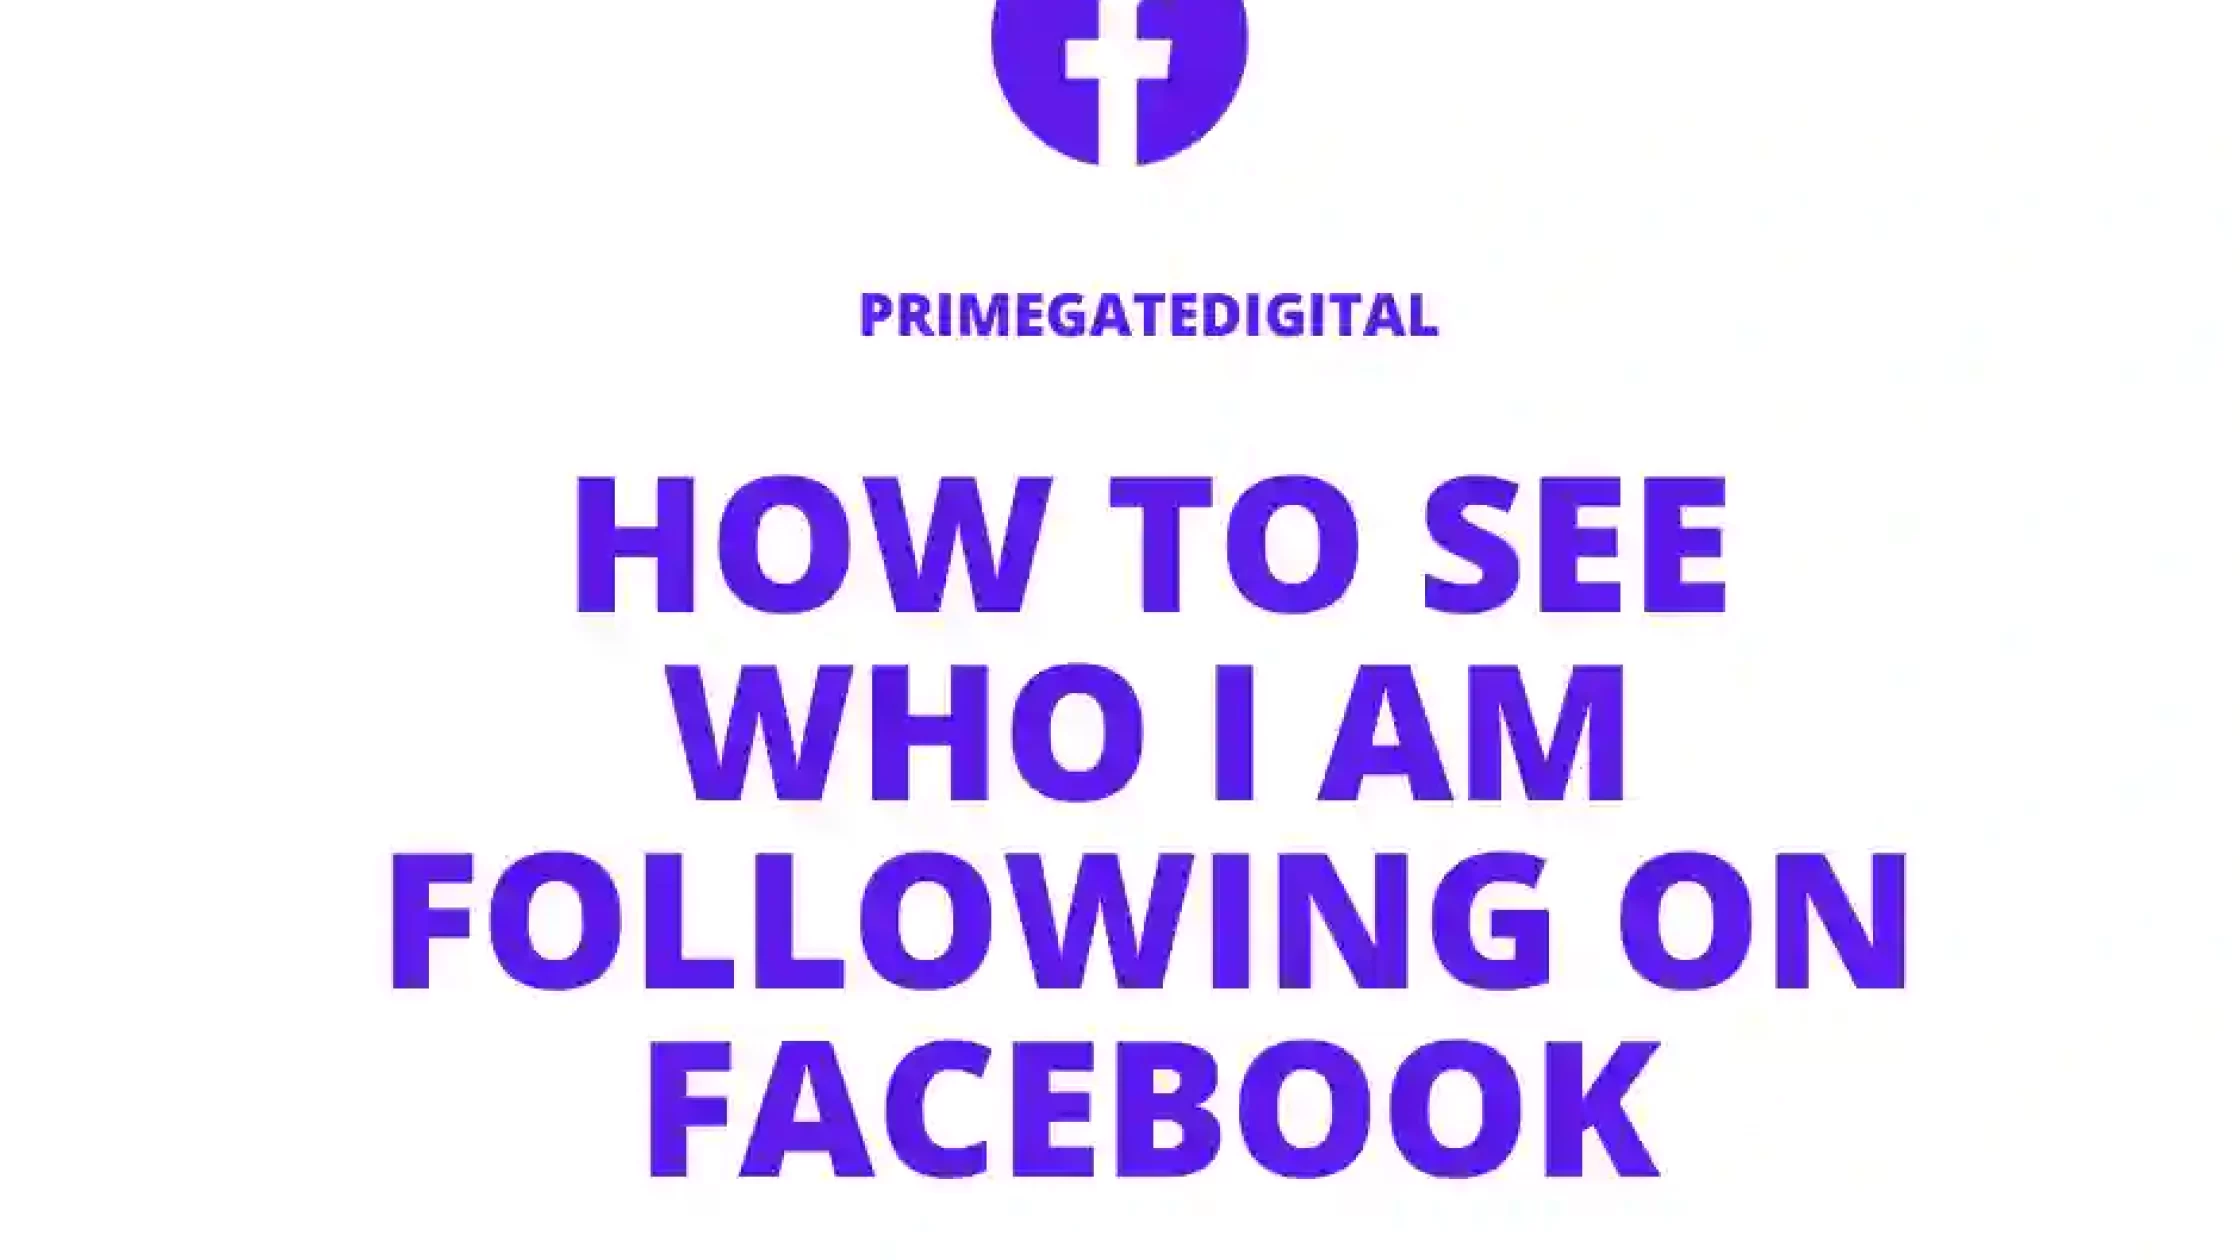 How to See Who I Am Following on Facebook